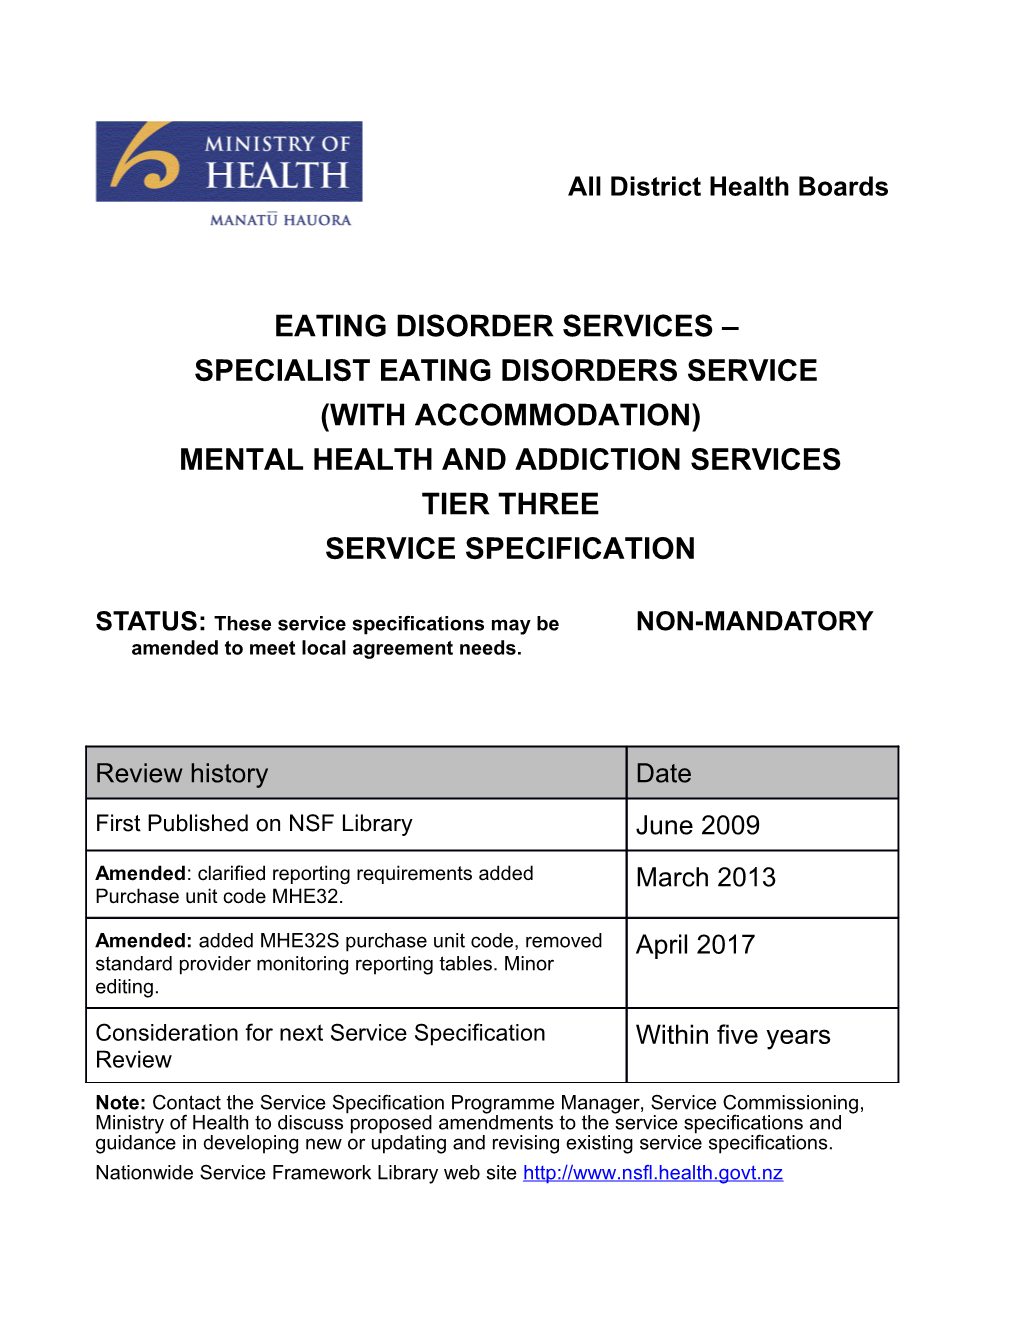 Specialist Eating Disorders Service